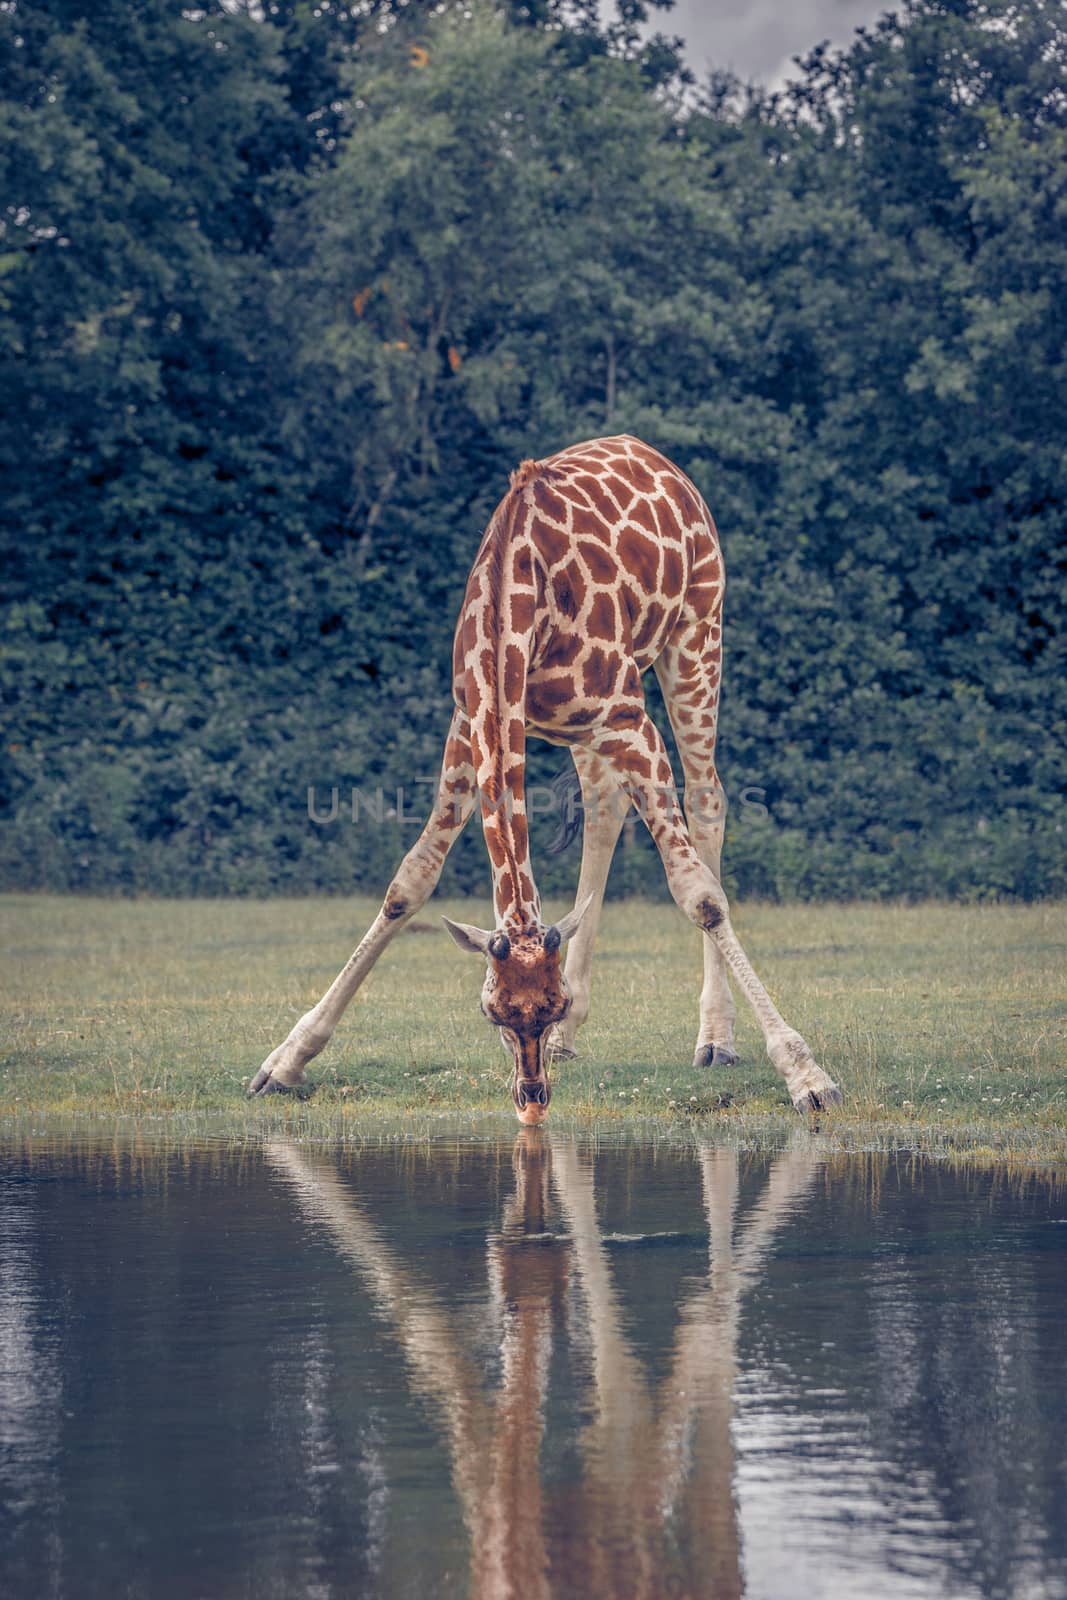 Giraffe drinking water at a pond by Sportactive